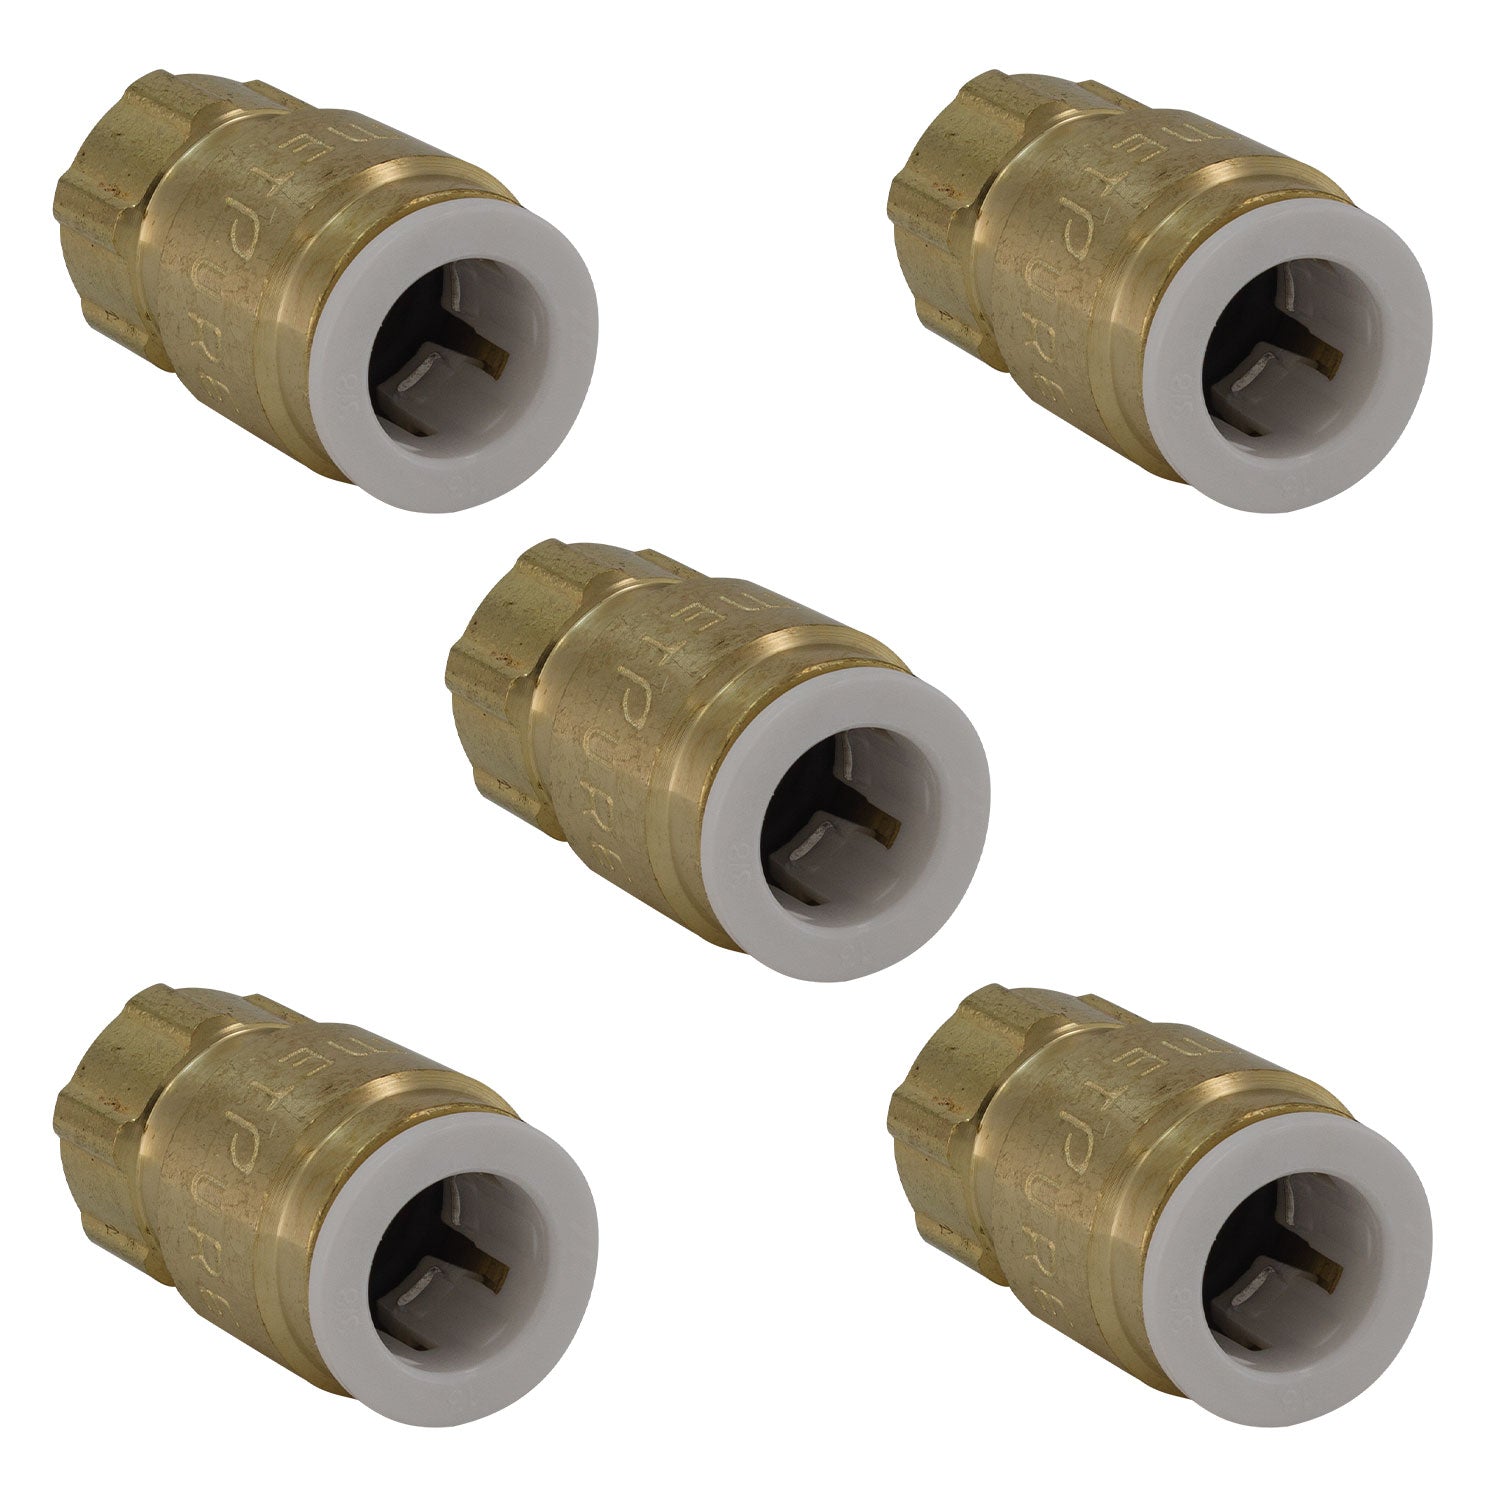 3/8OD Quick Connect x 1/4 COMP Female Brass Adapter 5 Pack